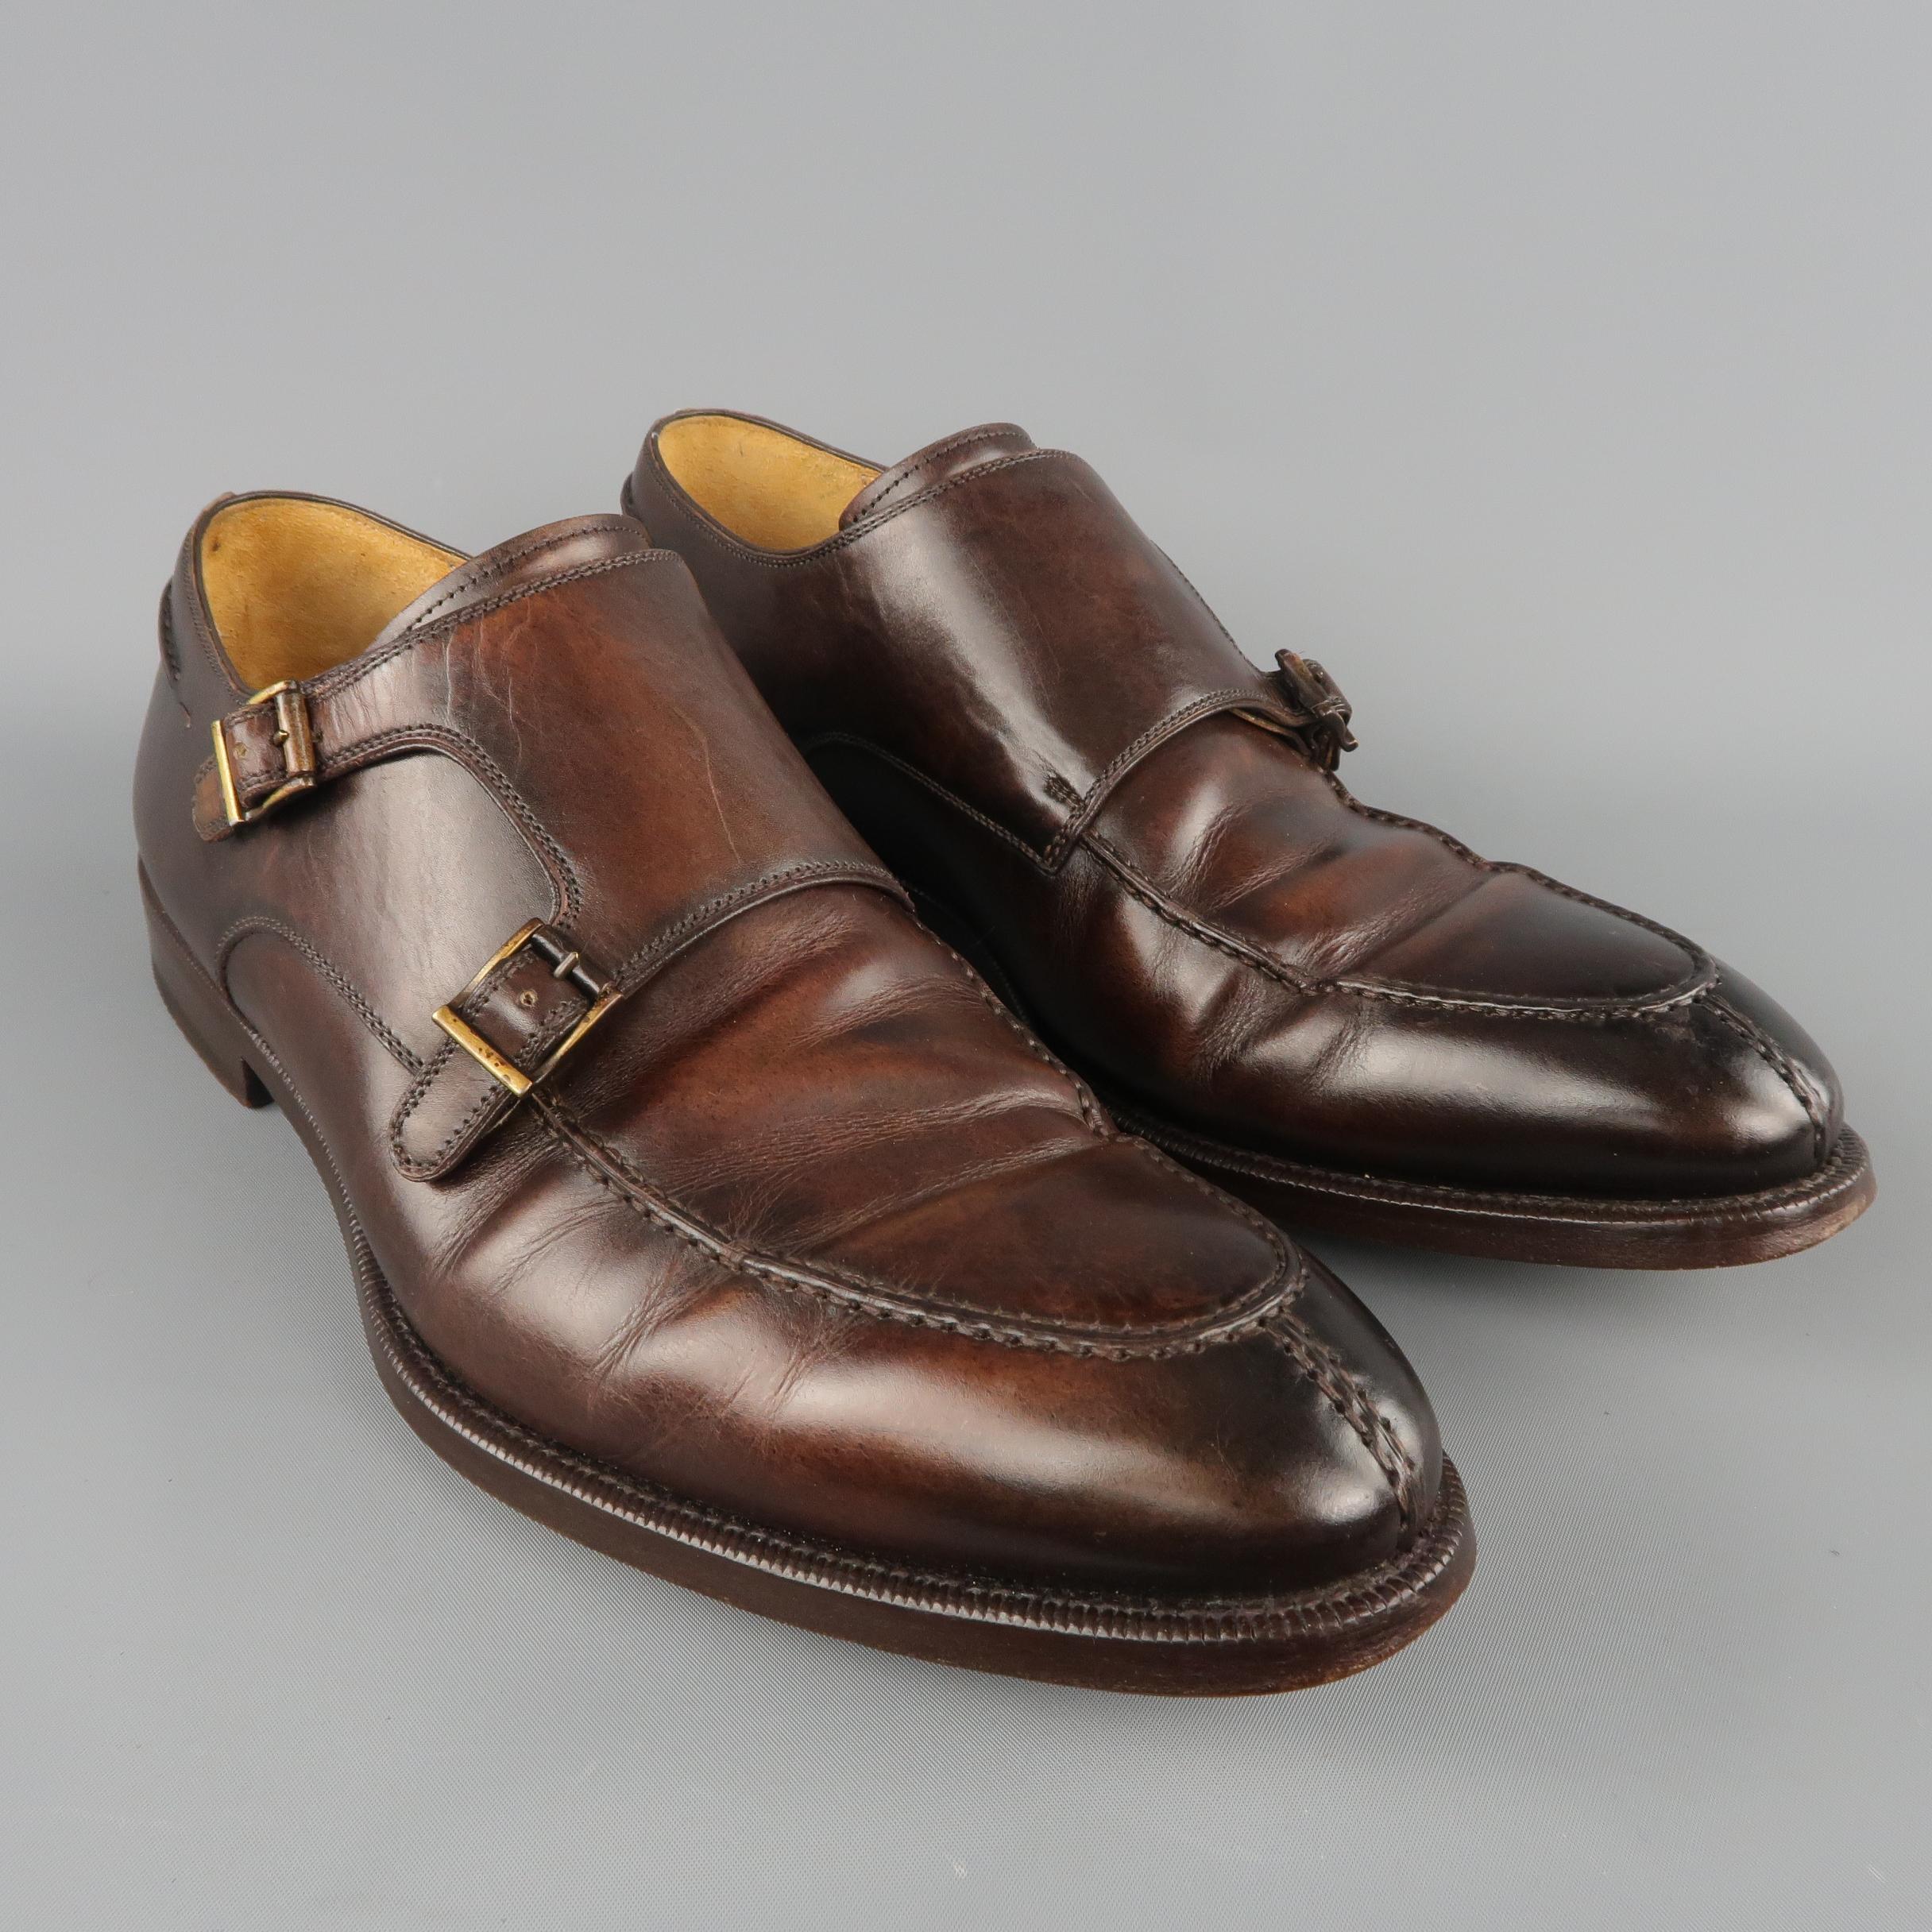 MAGNANNI dress shoes come in brown antiqued leather with a pointed apron split toe and double monk strap. Made in Spain.
 
Good Pre-Owned Condition.
Marked: UK 11 M
 
Outsole: 12.5 x 4.5 in.